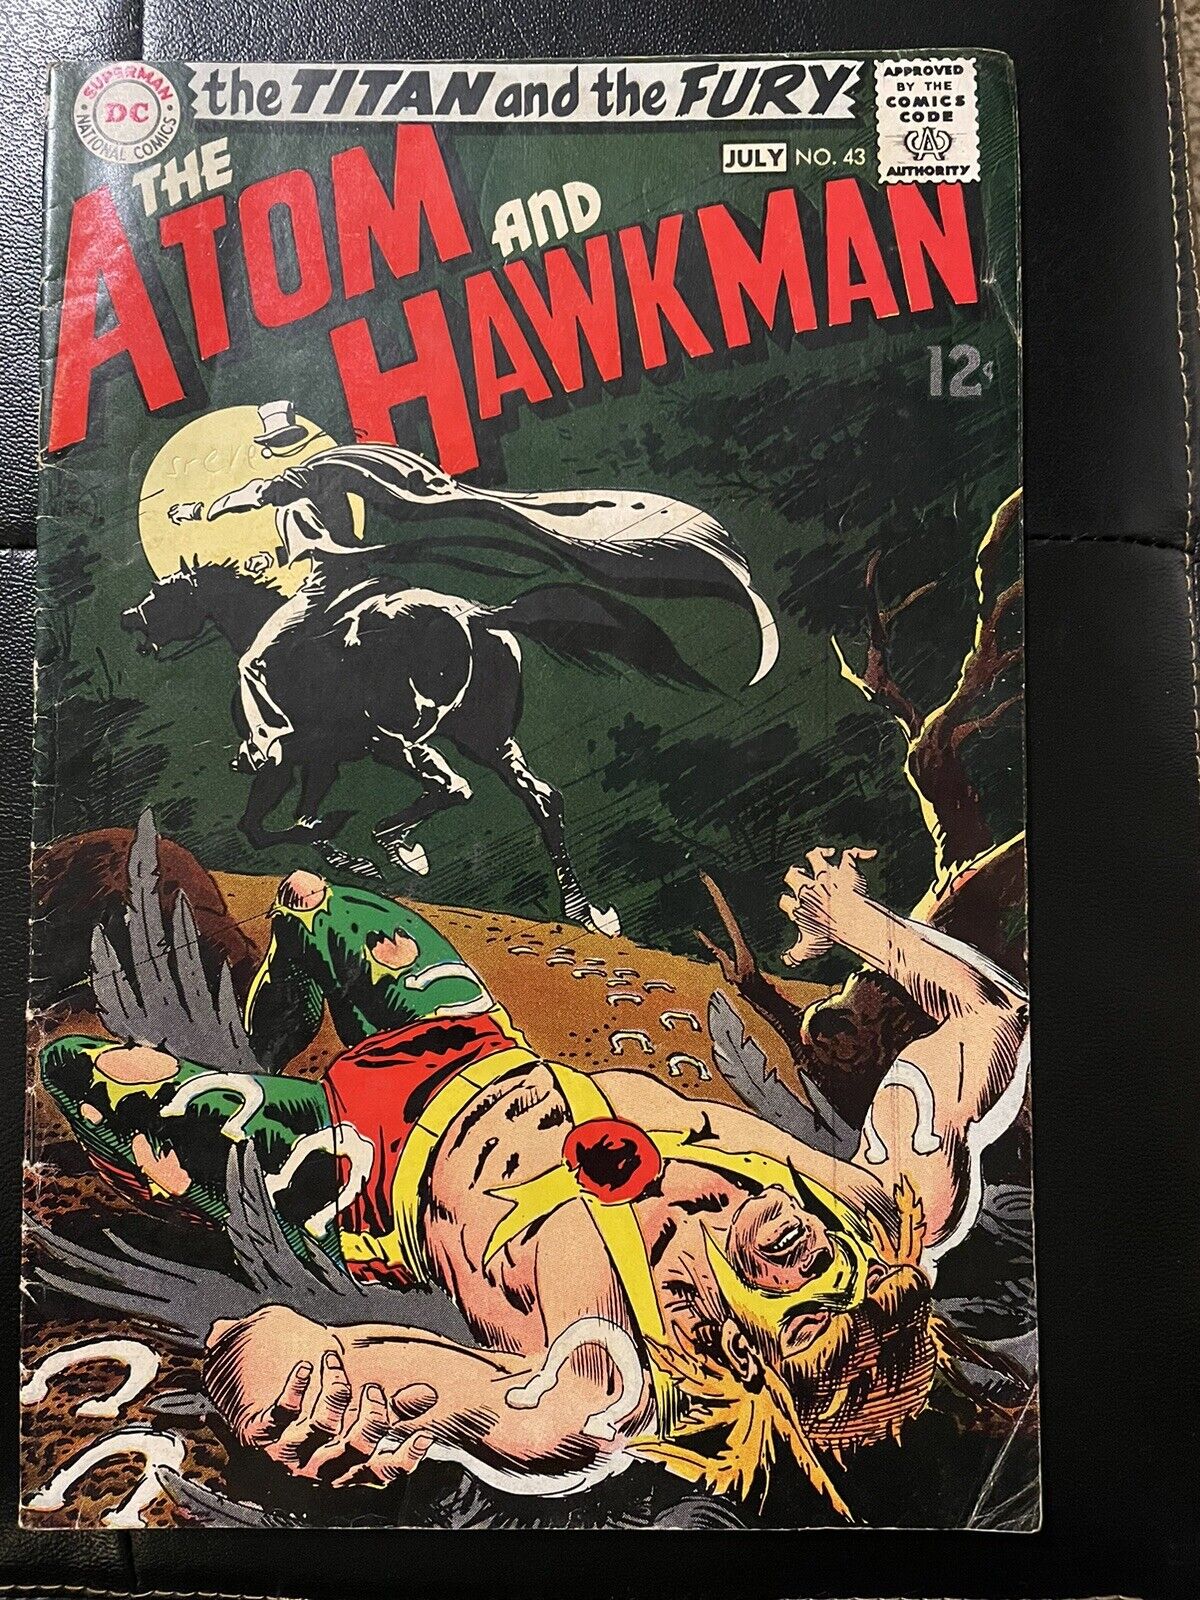 THE ATOM AND HAWKMAN # 43 TITAN AND THE FURY-1st APPEARANCE OF GENTLEMAN GHOST